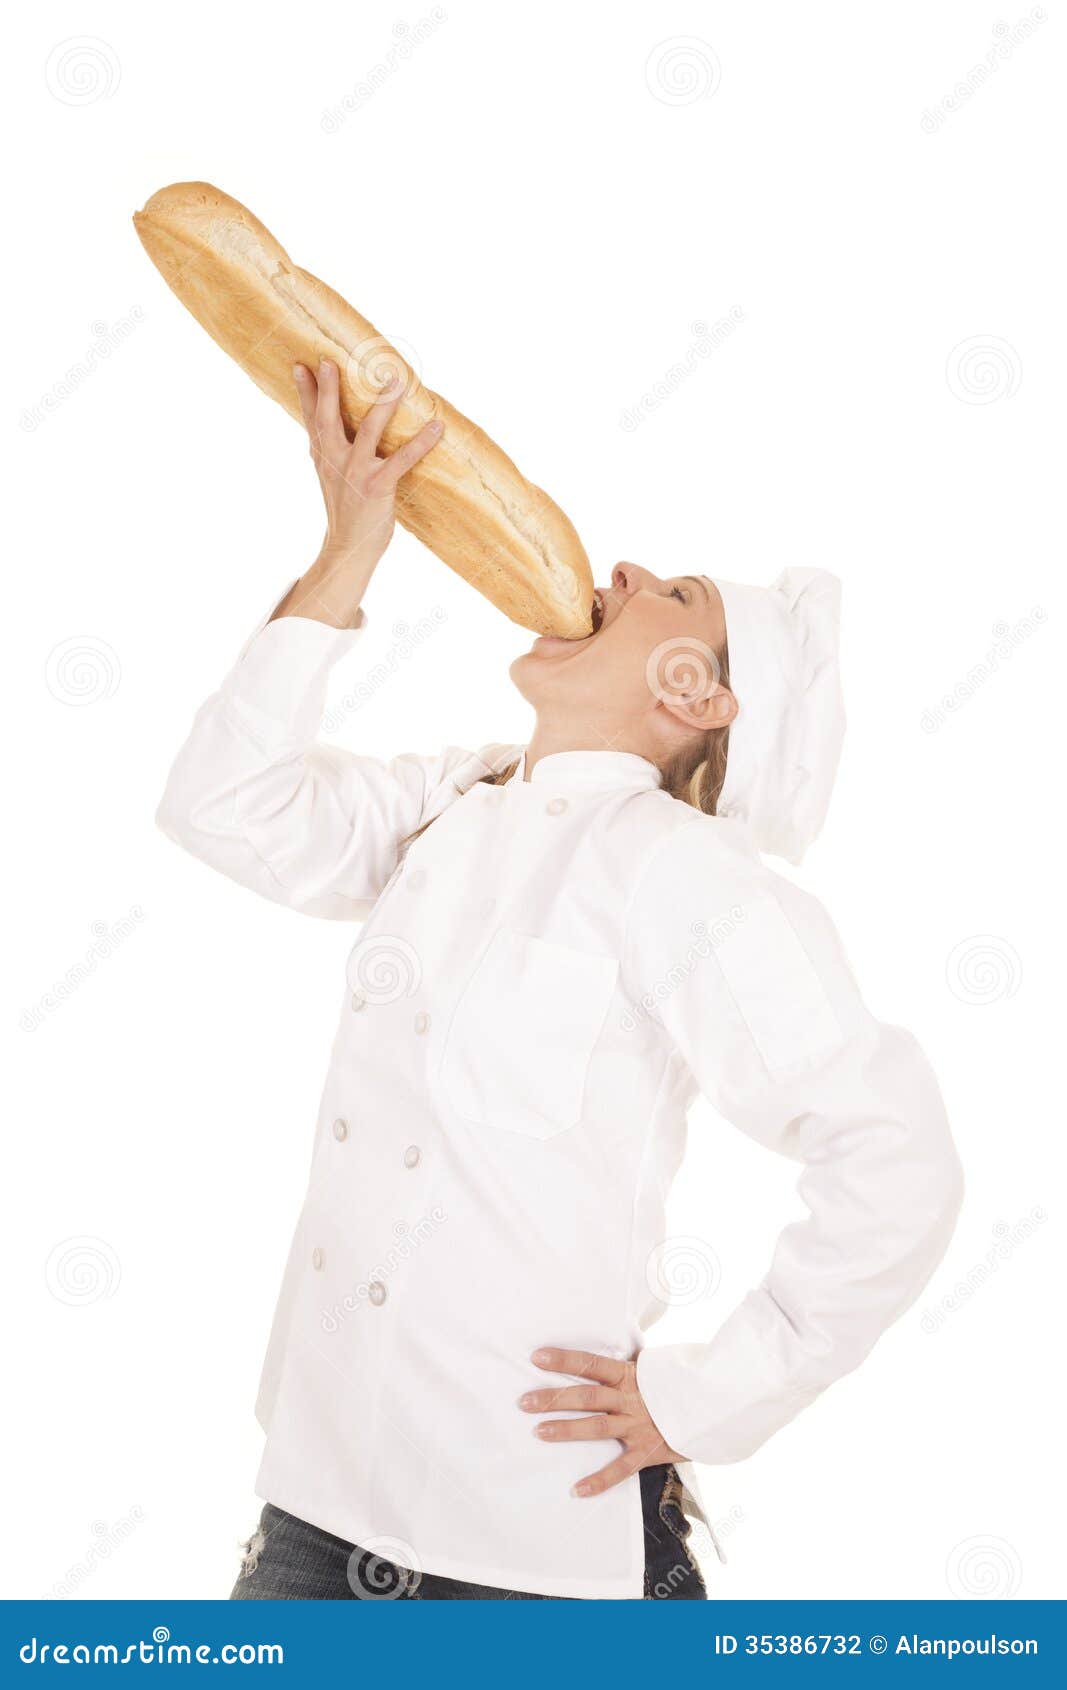 https://thumbs.dreamstime.com/z/woman-chef-bread-put-mouth-getting-ready-to-take-big-bit-out-her-loaf-35386732.jpg